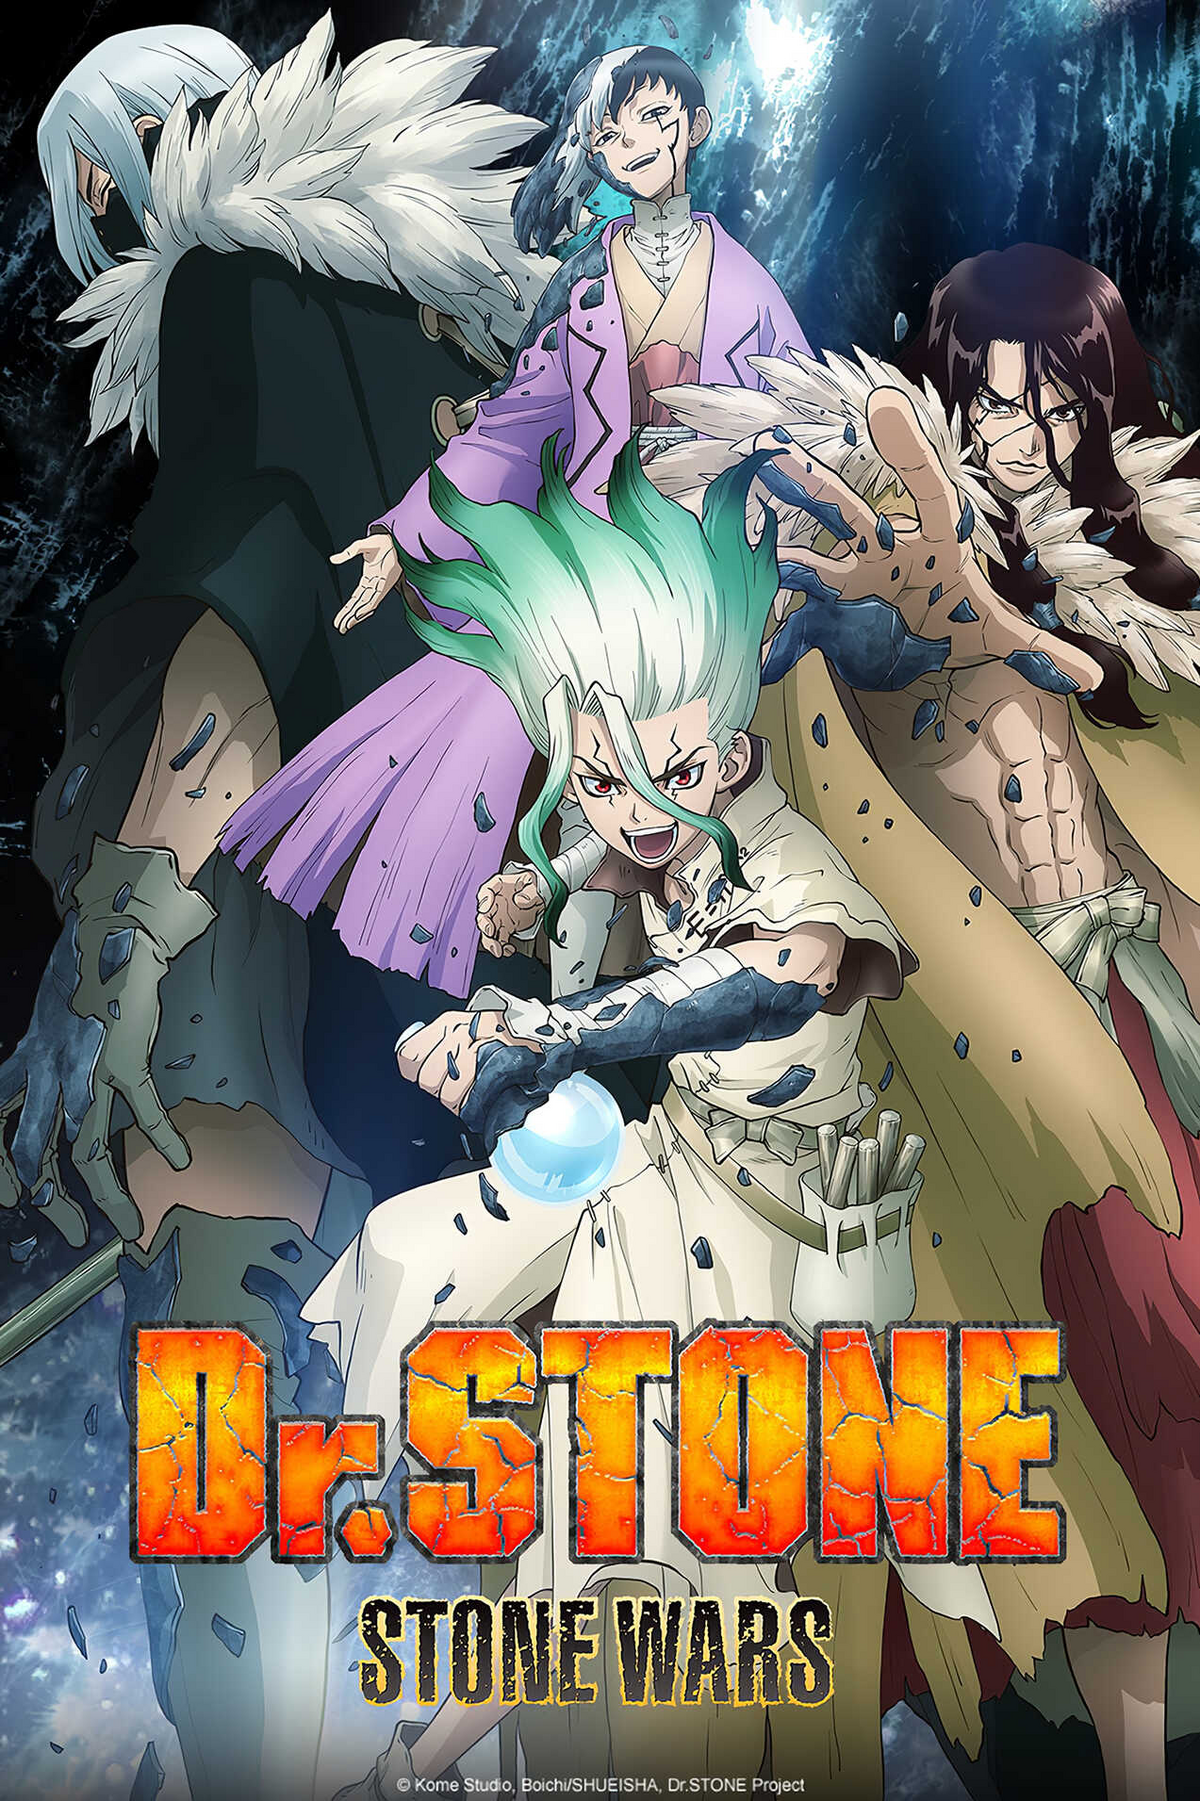 Dr Stone Season 3 Episode 8 Release Date Everything You Need to Know